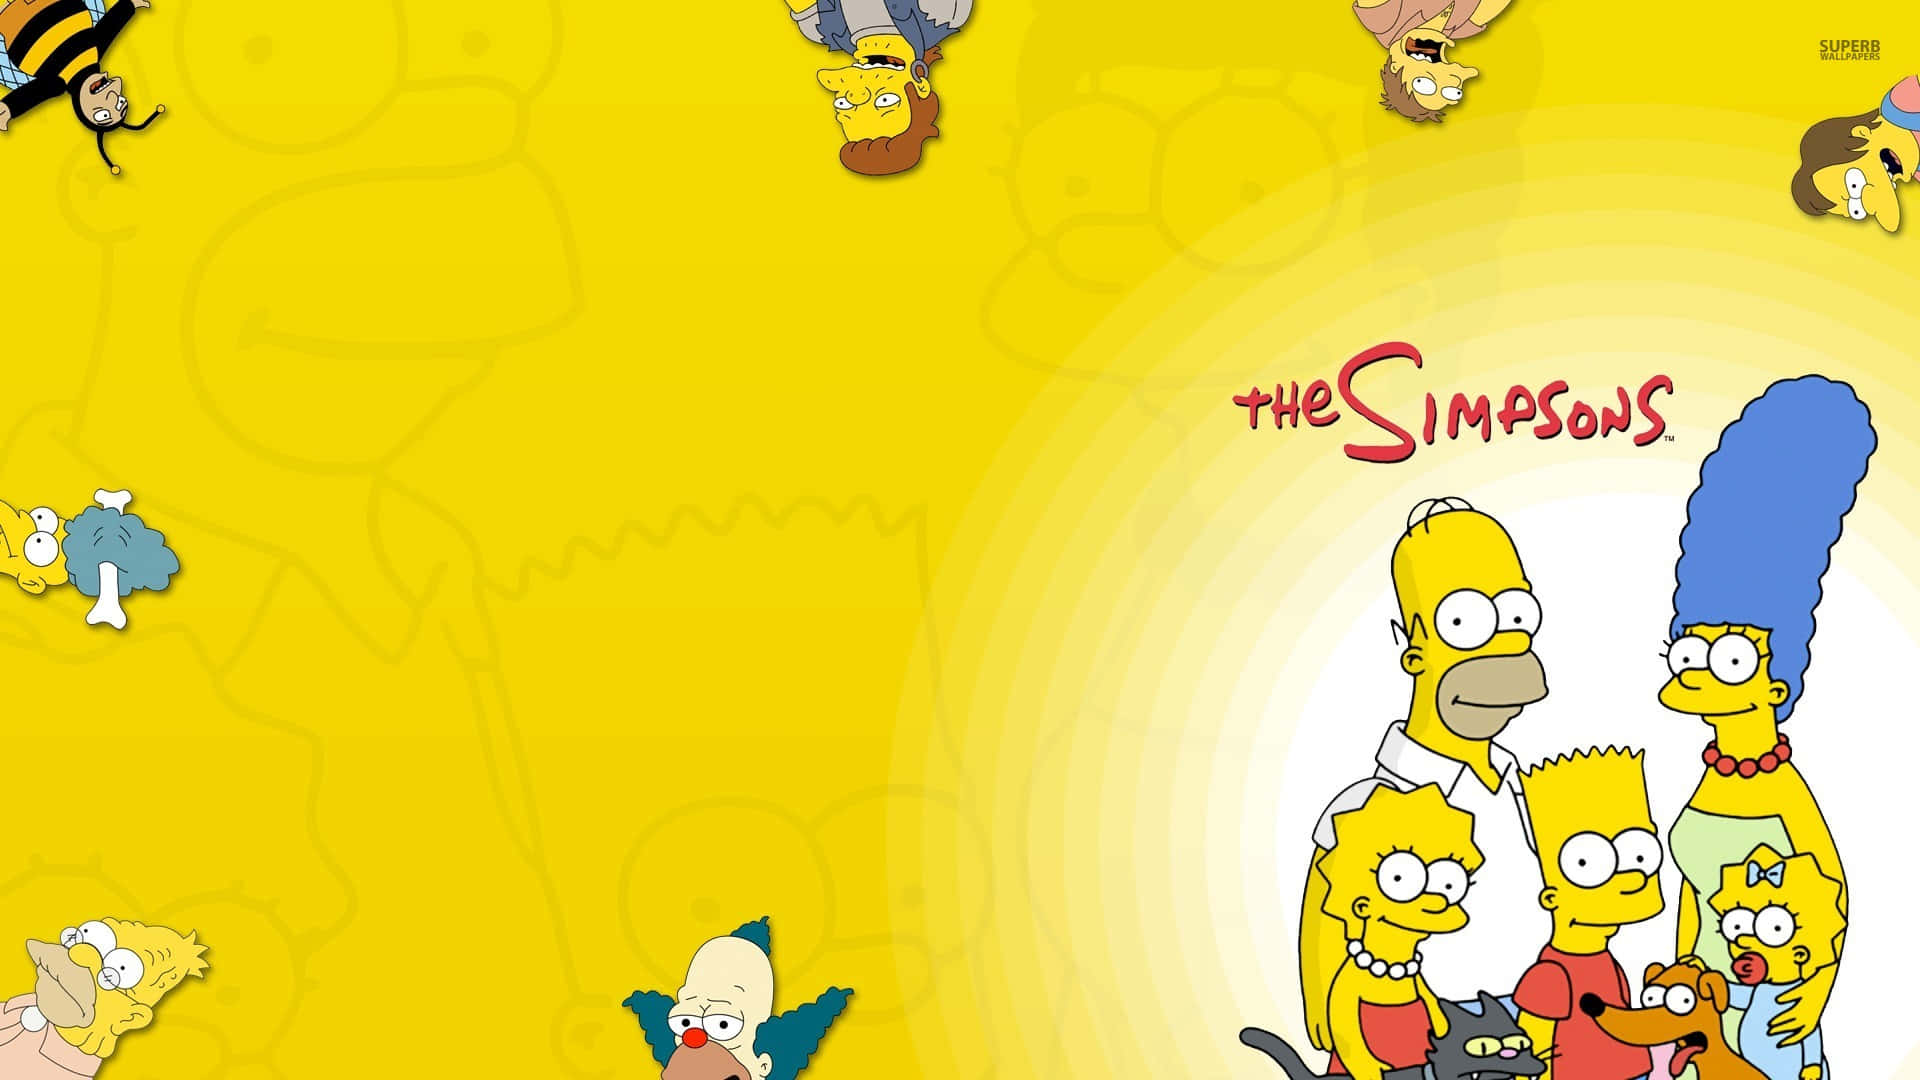 The Simpsons Wallpapers Hd Wallpapers Wallpaper